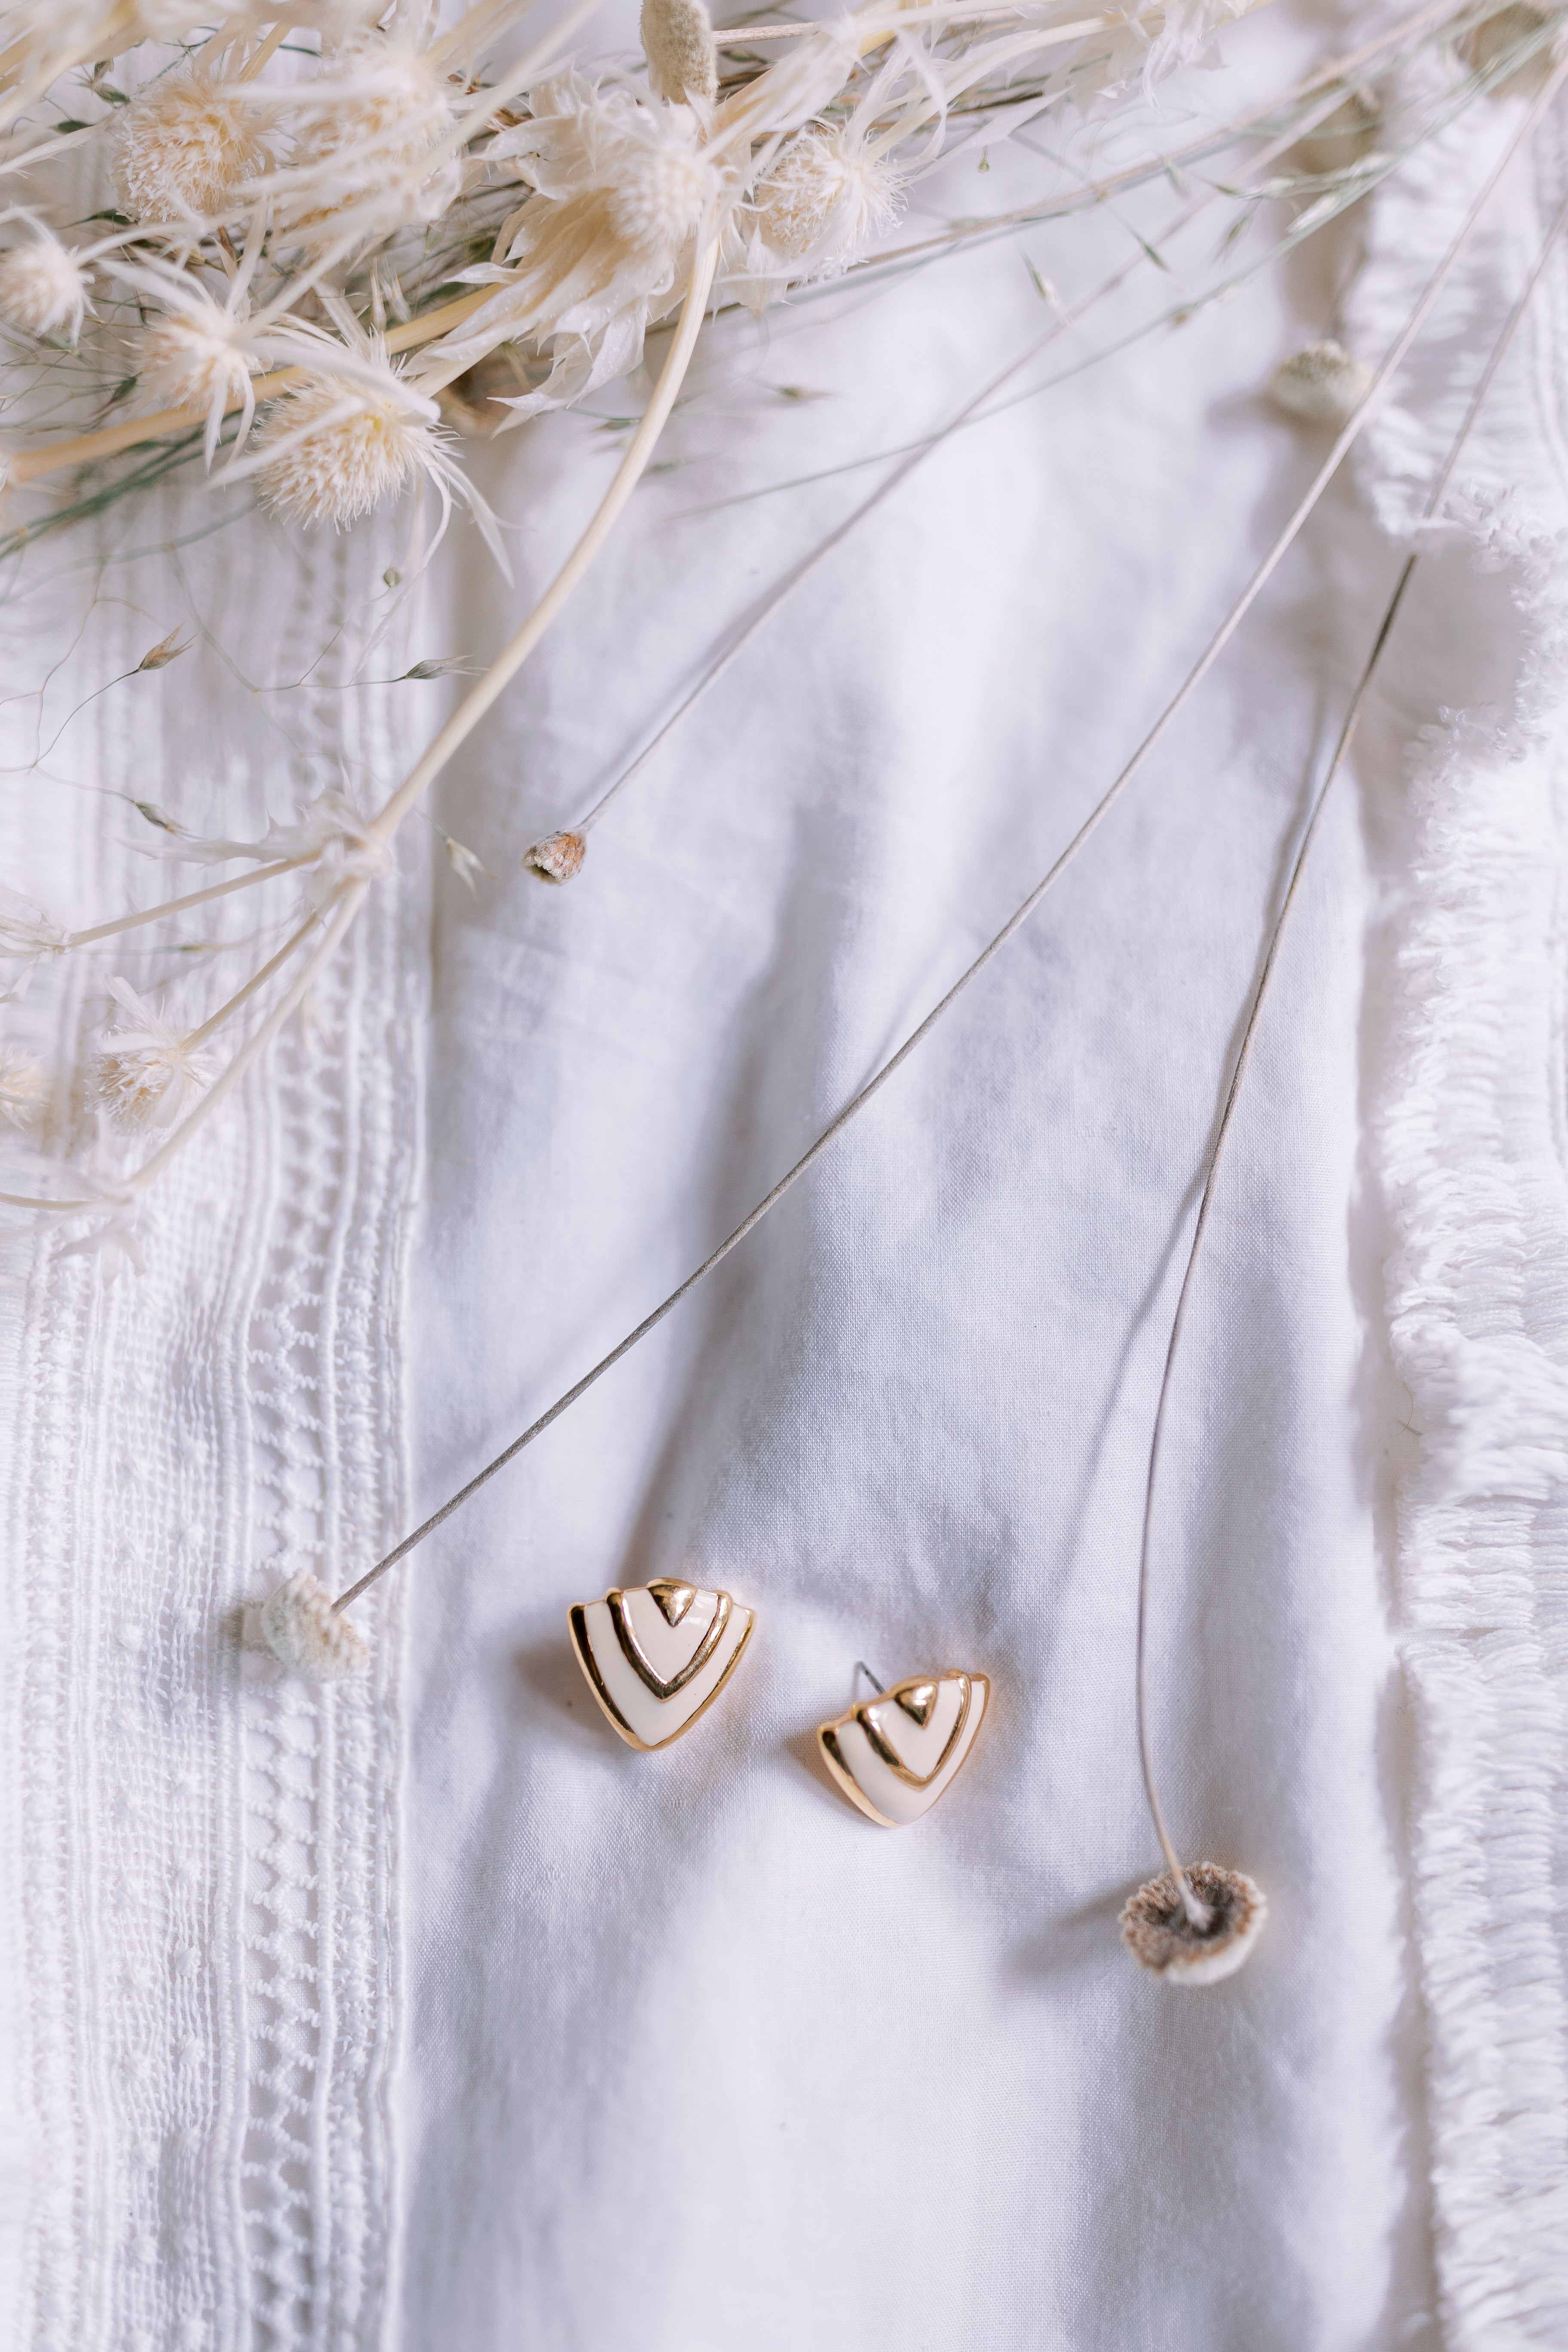 Vintage White and Gold Geometric Studs